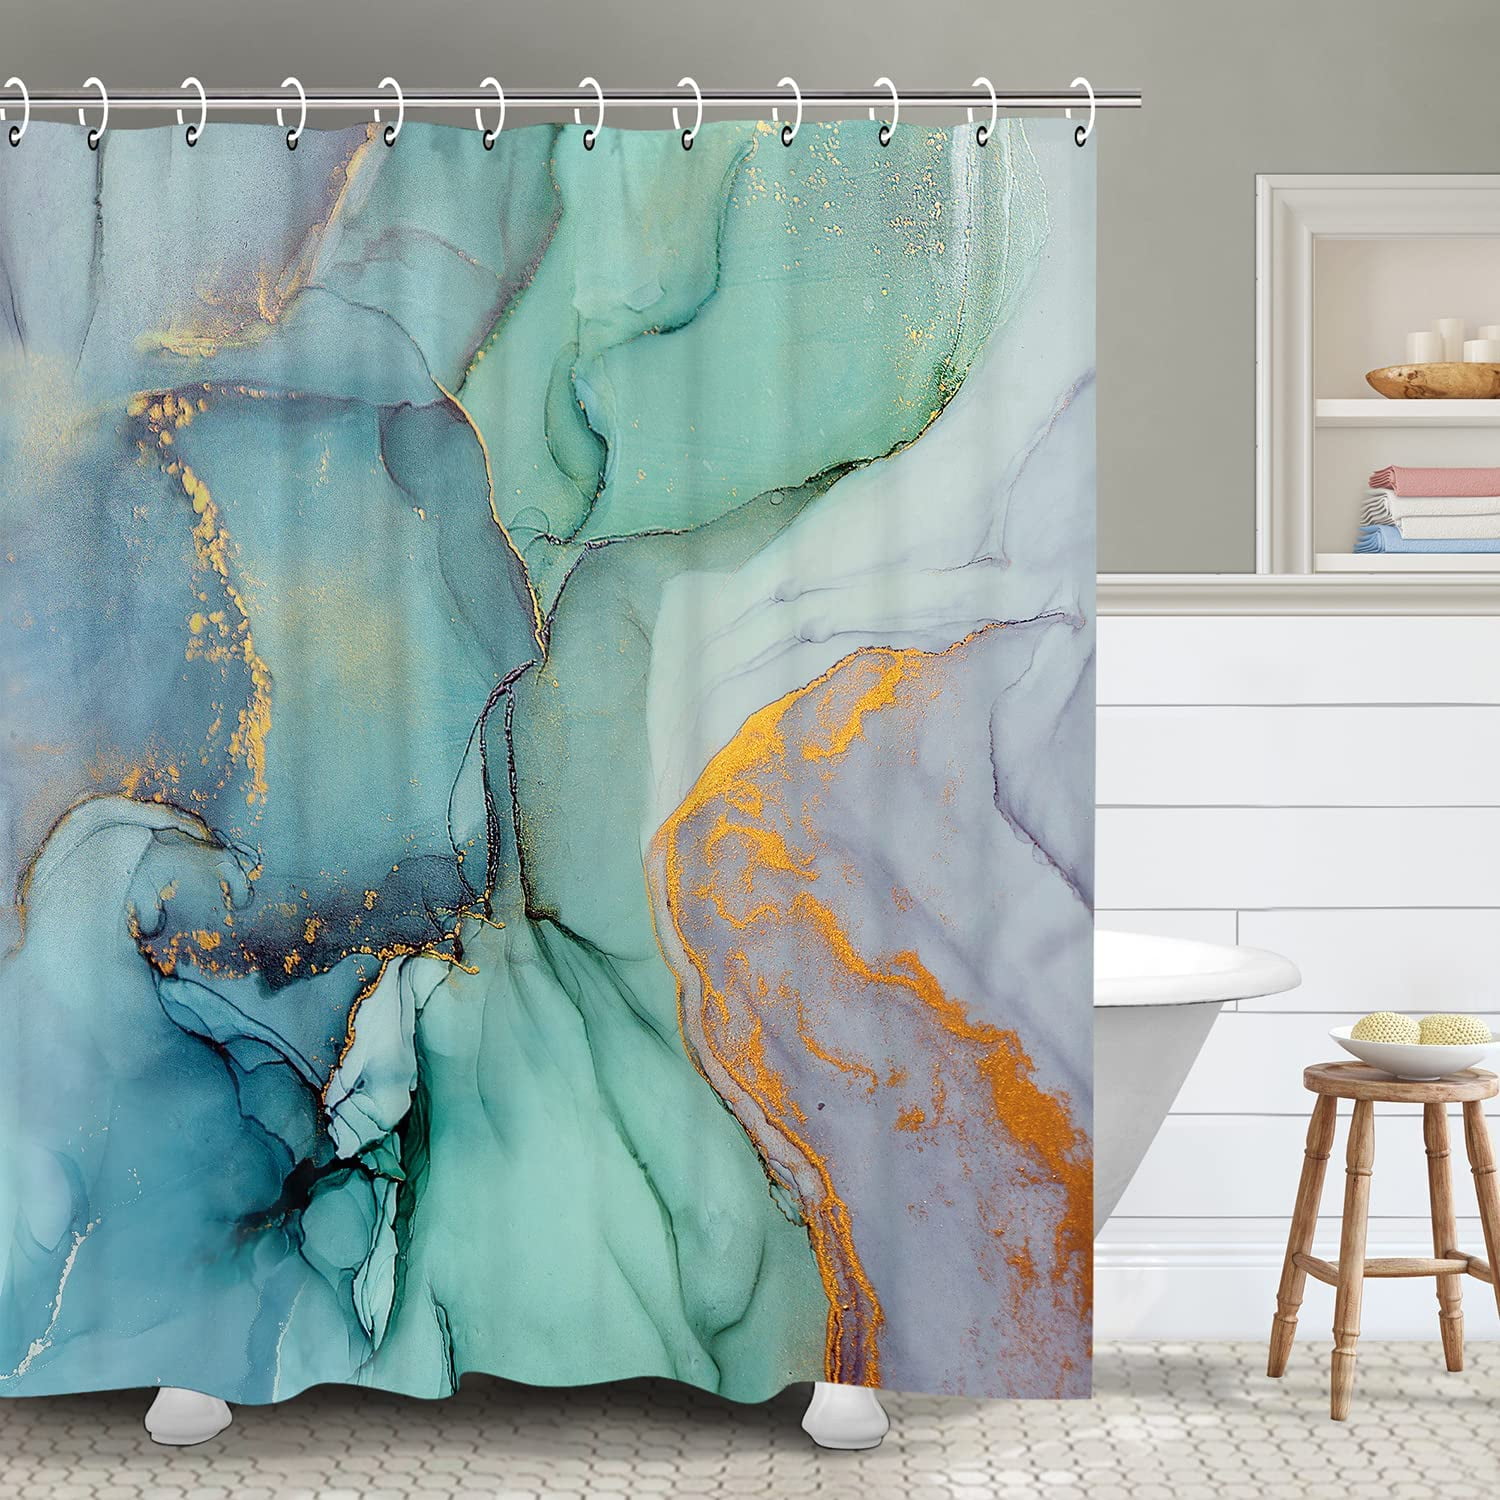 Details about   Shells Shower Curtain Fabric Bathroom Decor Set with Hooks 4 Sizes 